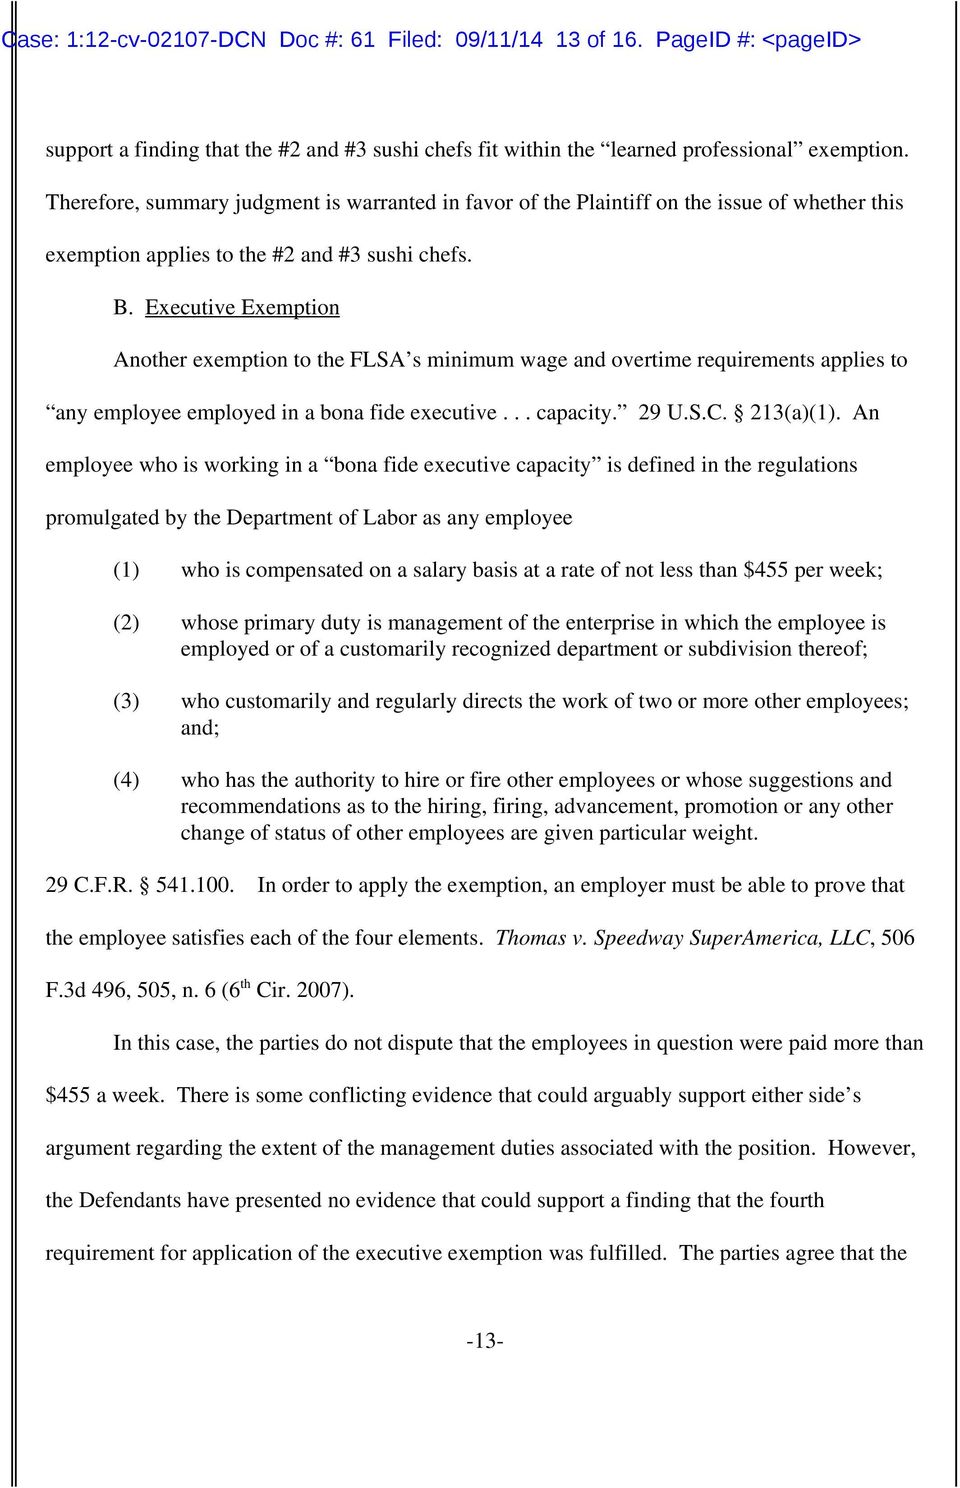 Executive Exemption Another exemption to the FLSA s minimum wage and overtime requirements applies to any employee employed in a bona fide executive... capacity. 29 U.S.C. 213(a)(1).